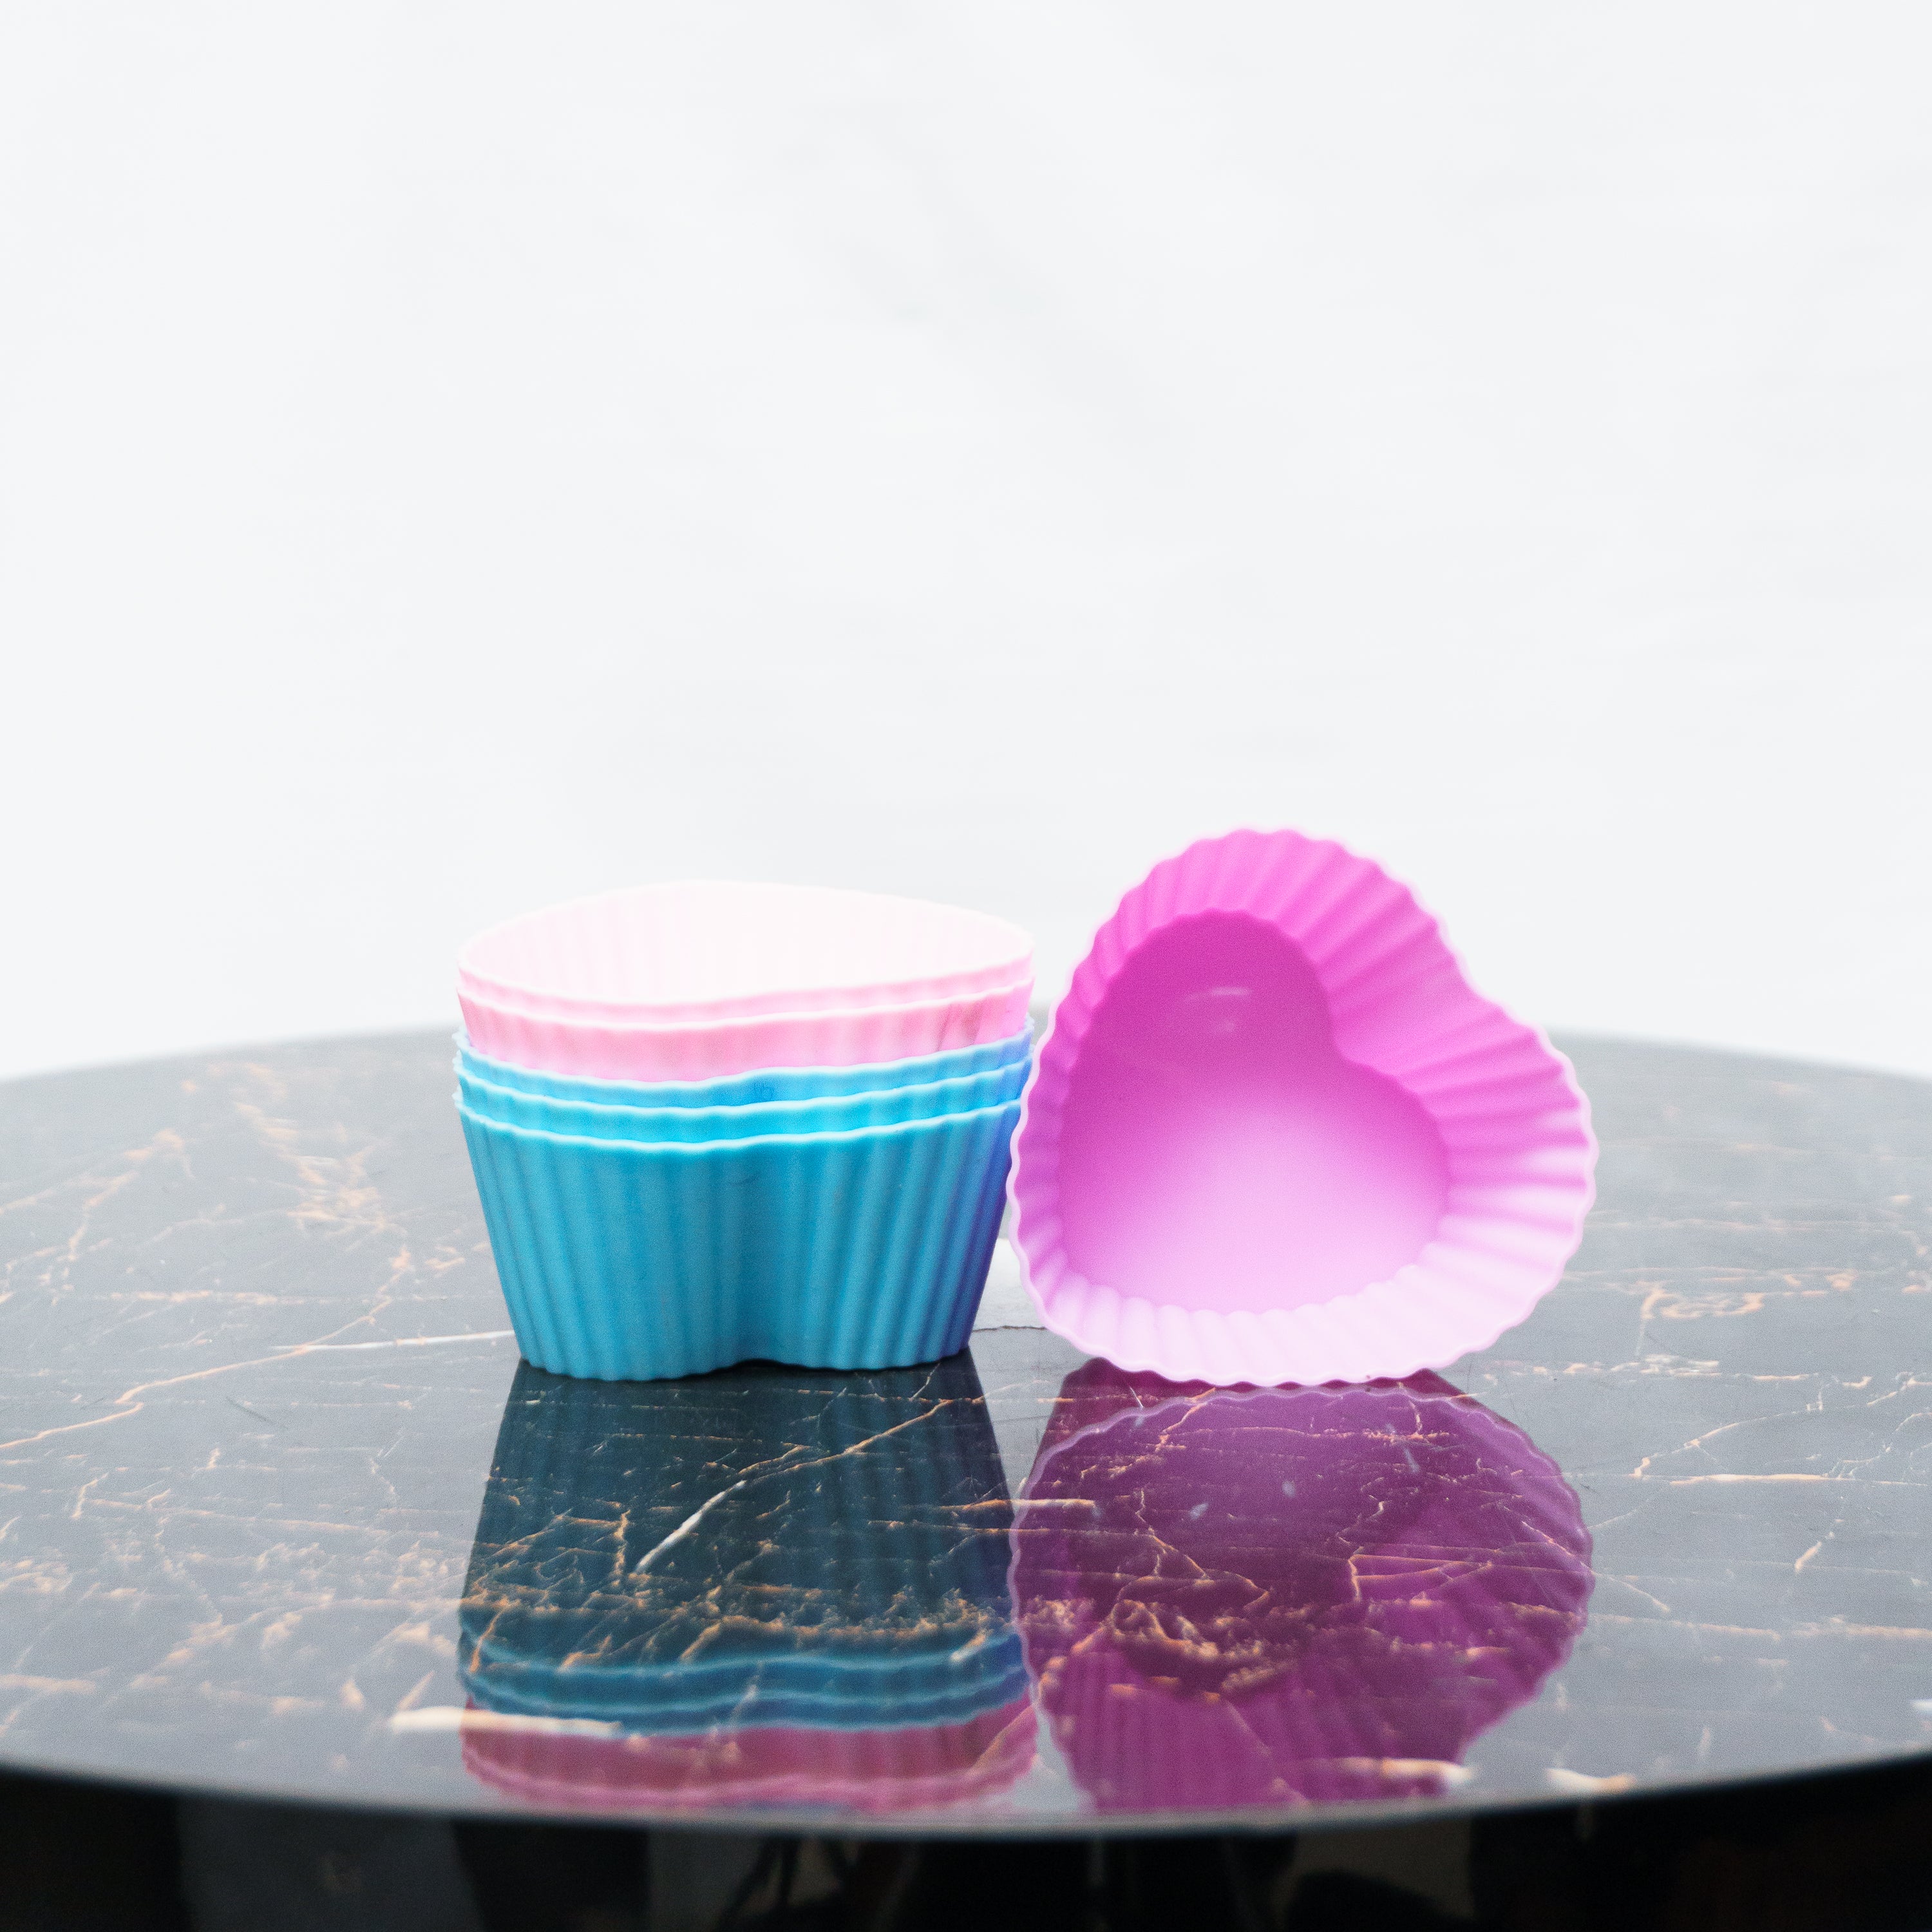 High-Quality Plastic Small Bowls: Convenience in Every Bite